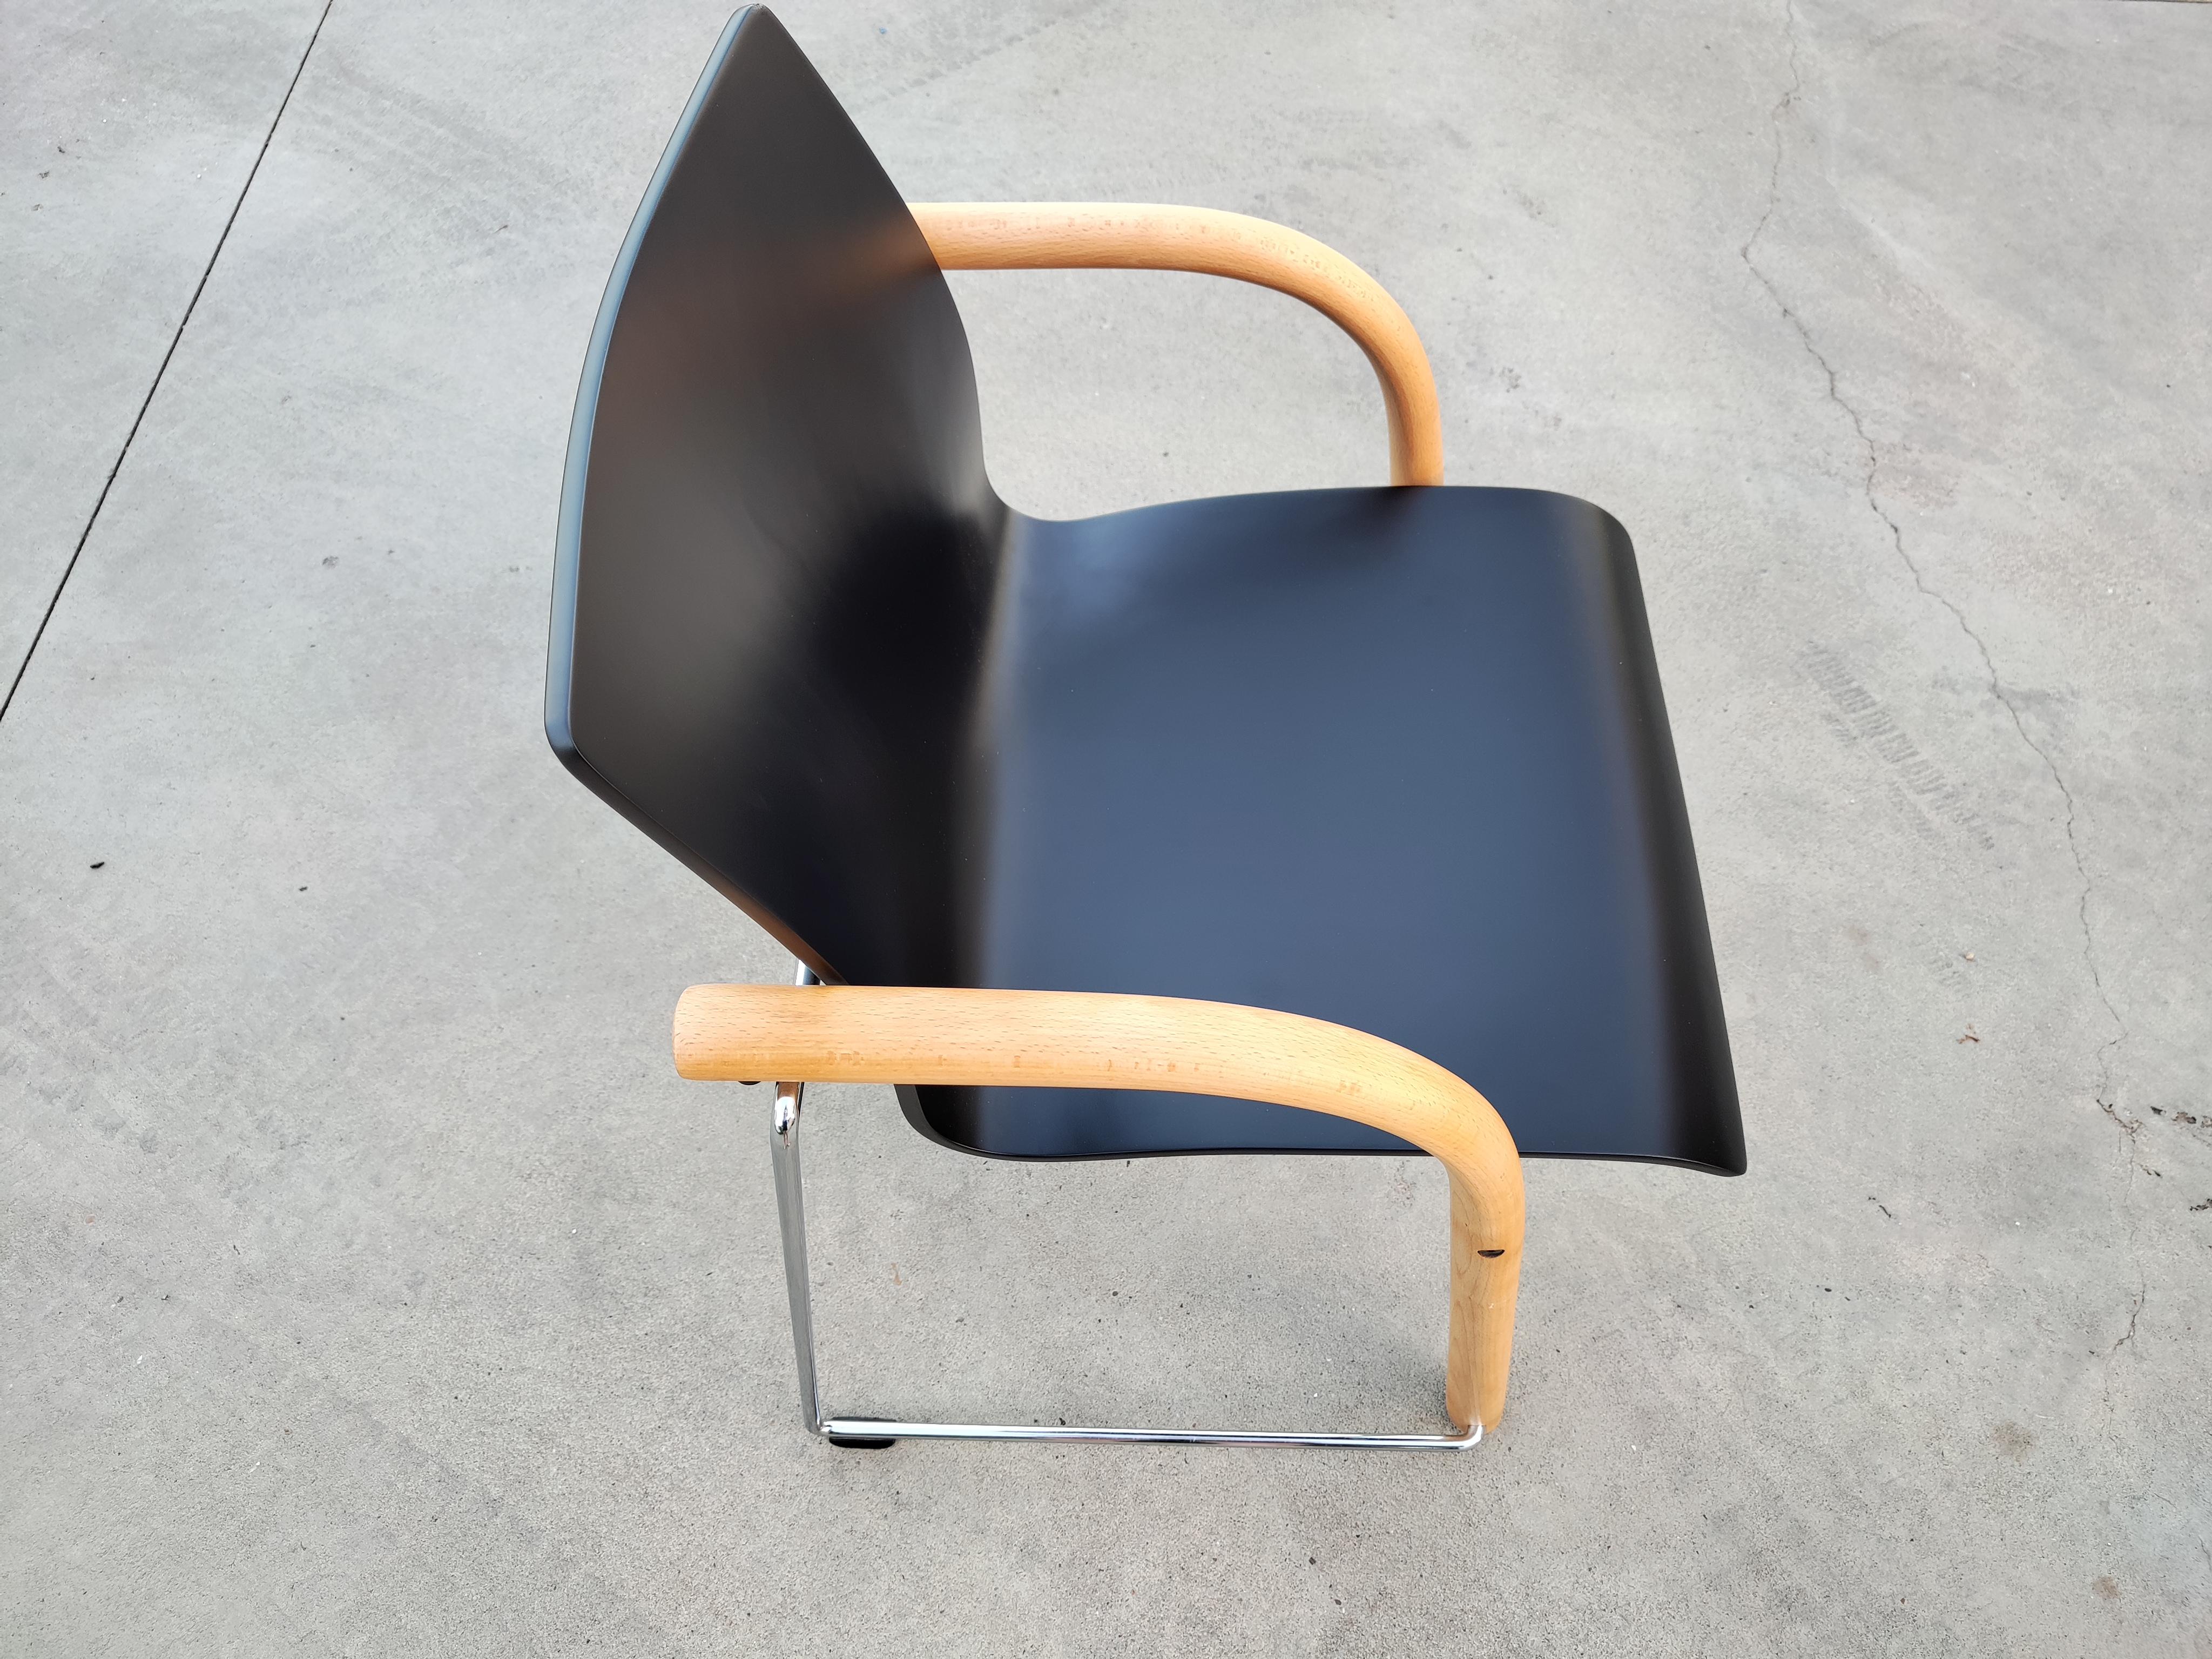 Refurbished Thonet Chairs 320 by Wulf Schneider and Ulrich Bohme, Austria 1984 For Sale 3